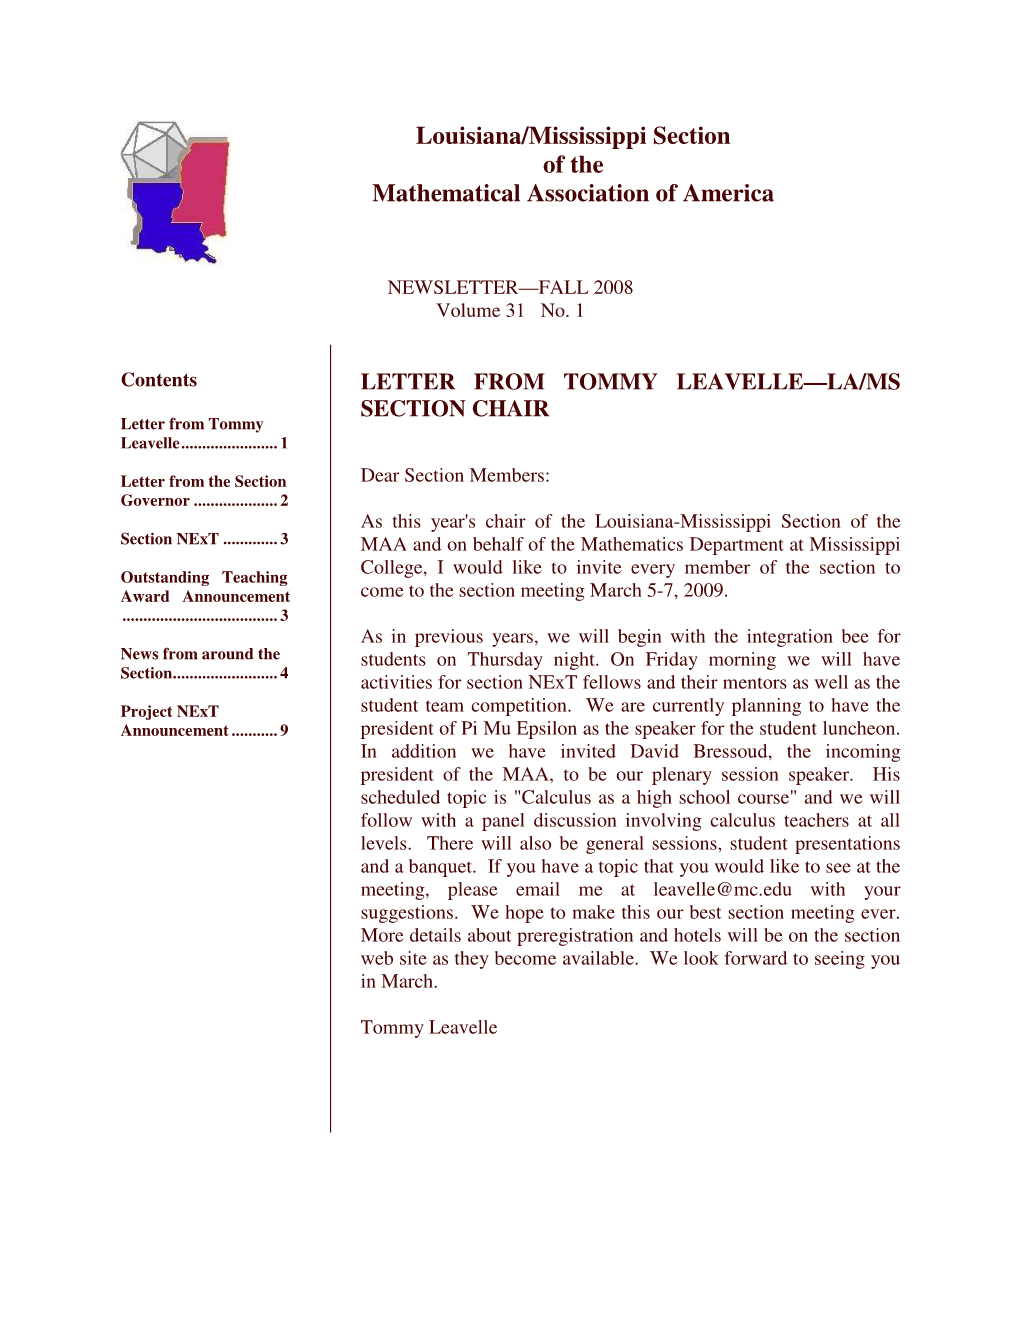 Louisiana/Mississippi Section of the Mathematical Association of America